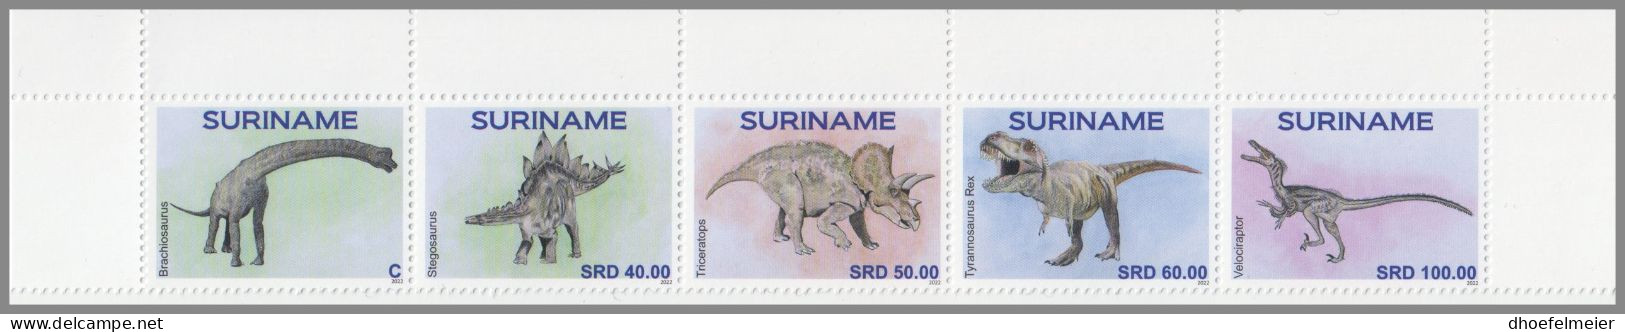 SURINAME 2022 MNH Dinosaurs Dinosaurier 5v – OFFICIAL ISSUE – DHQ49610 - Preistorici